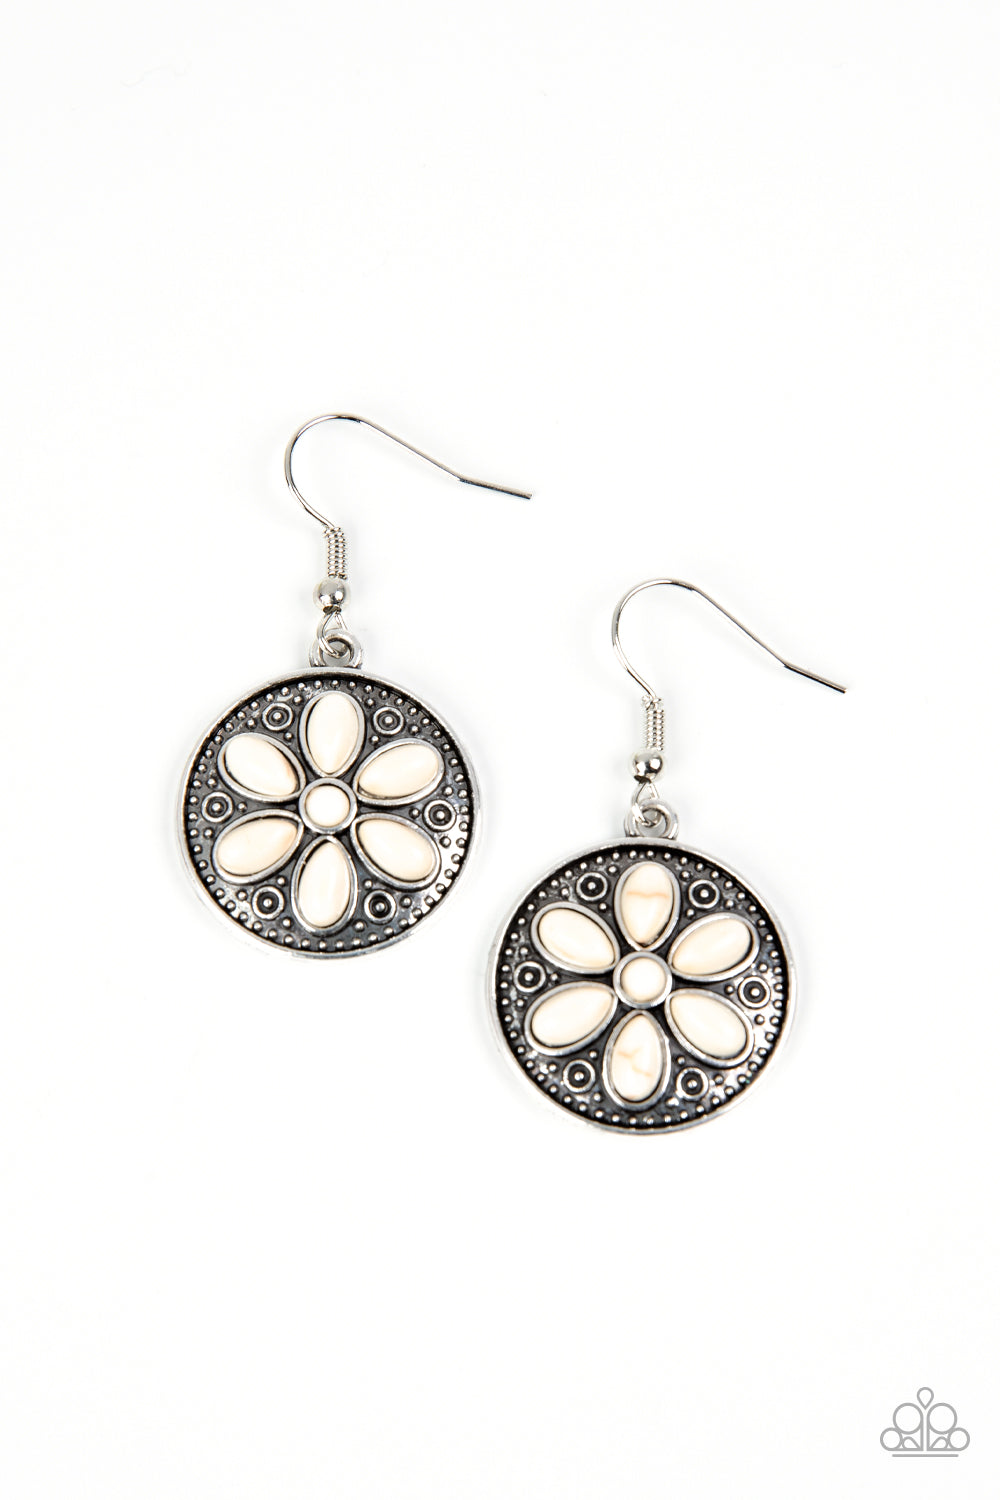 Saguaro Spring - White Stone and Silver Earrings - Paparazzi Accessories - Earthy white stones are pressed into the front of a studded silver frame, blooming into a rustic daisy for a seasonal look. Earring attaches to a standard fishhook fitting.  Sold as one pair of earrings.